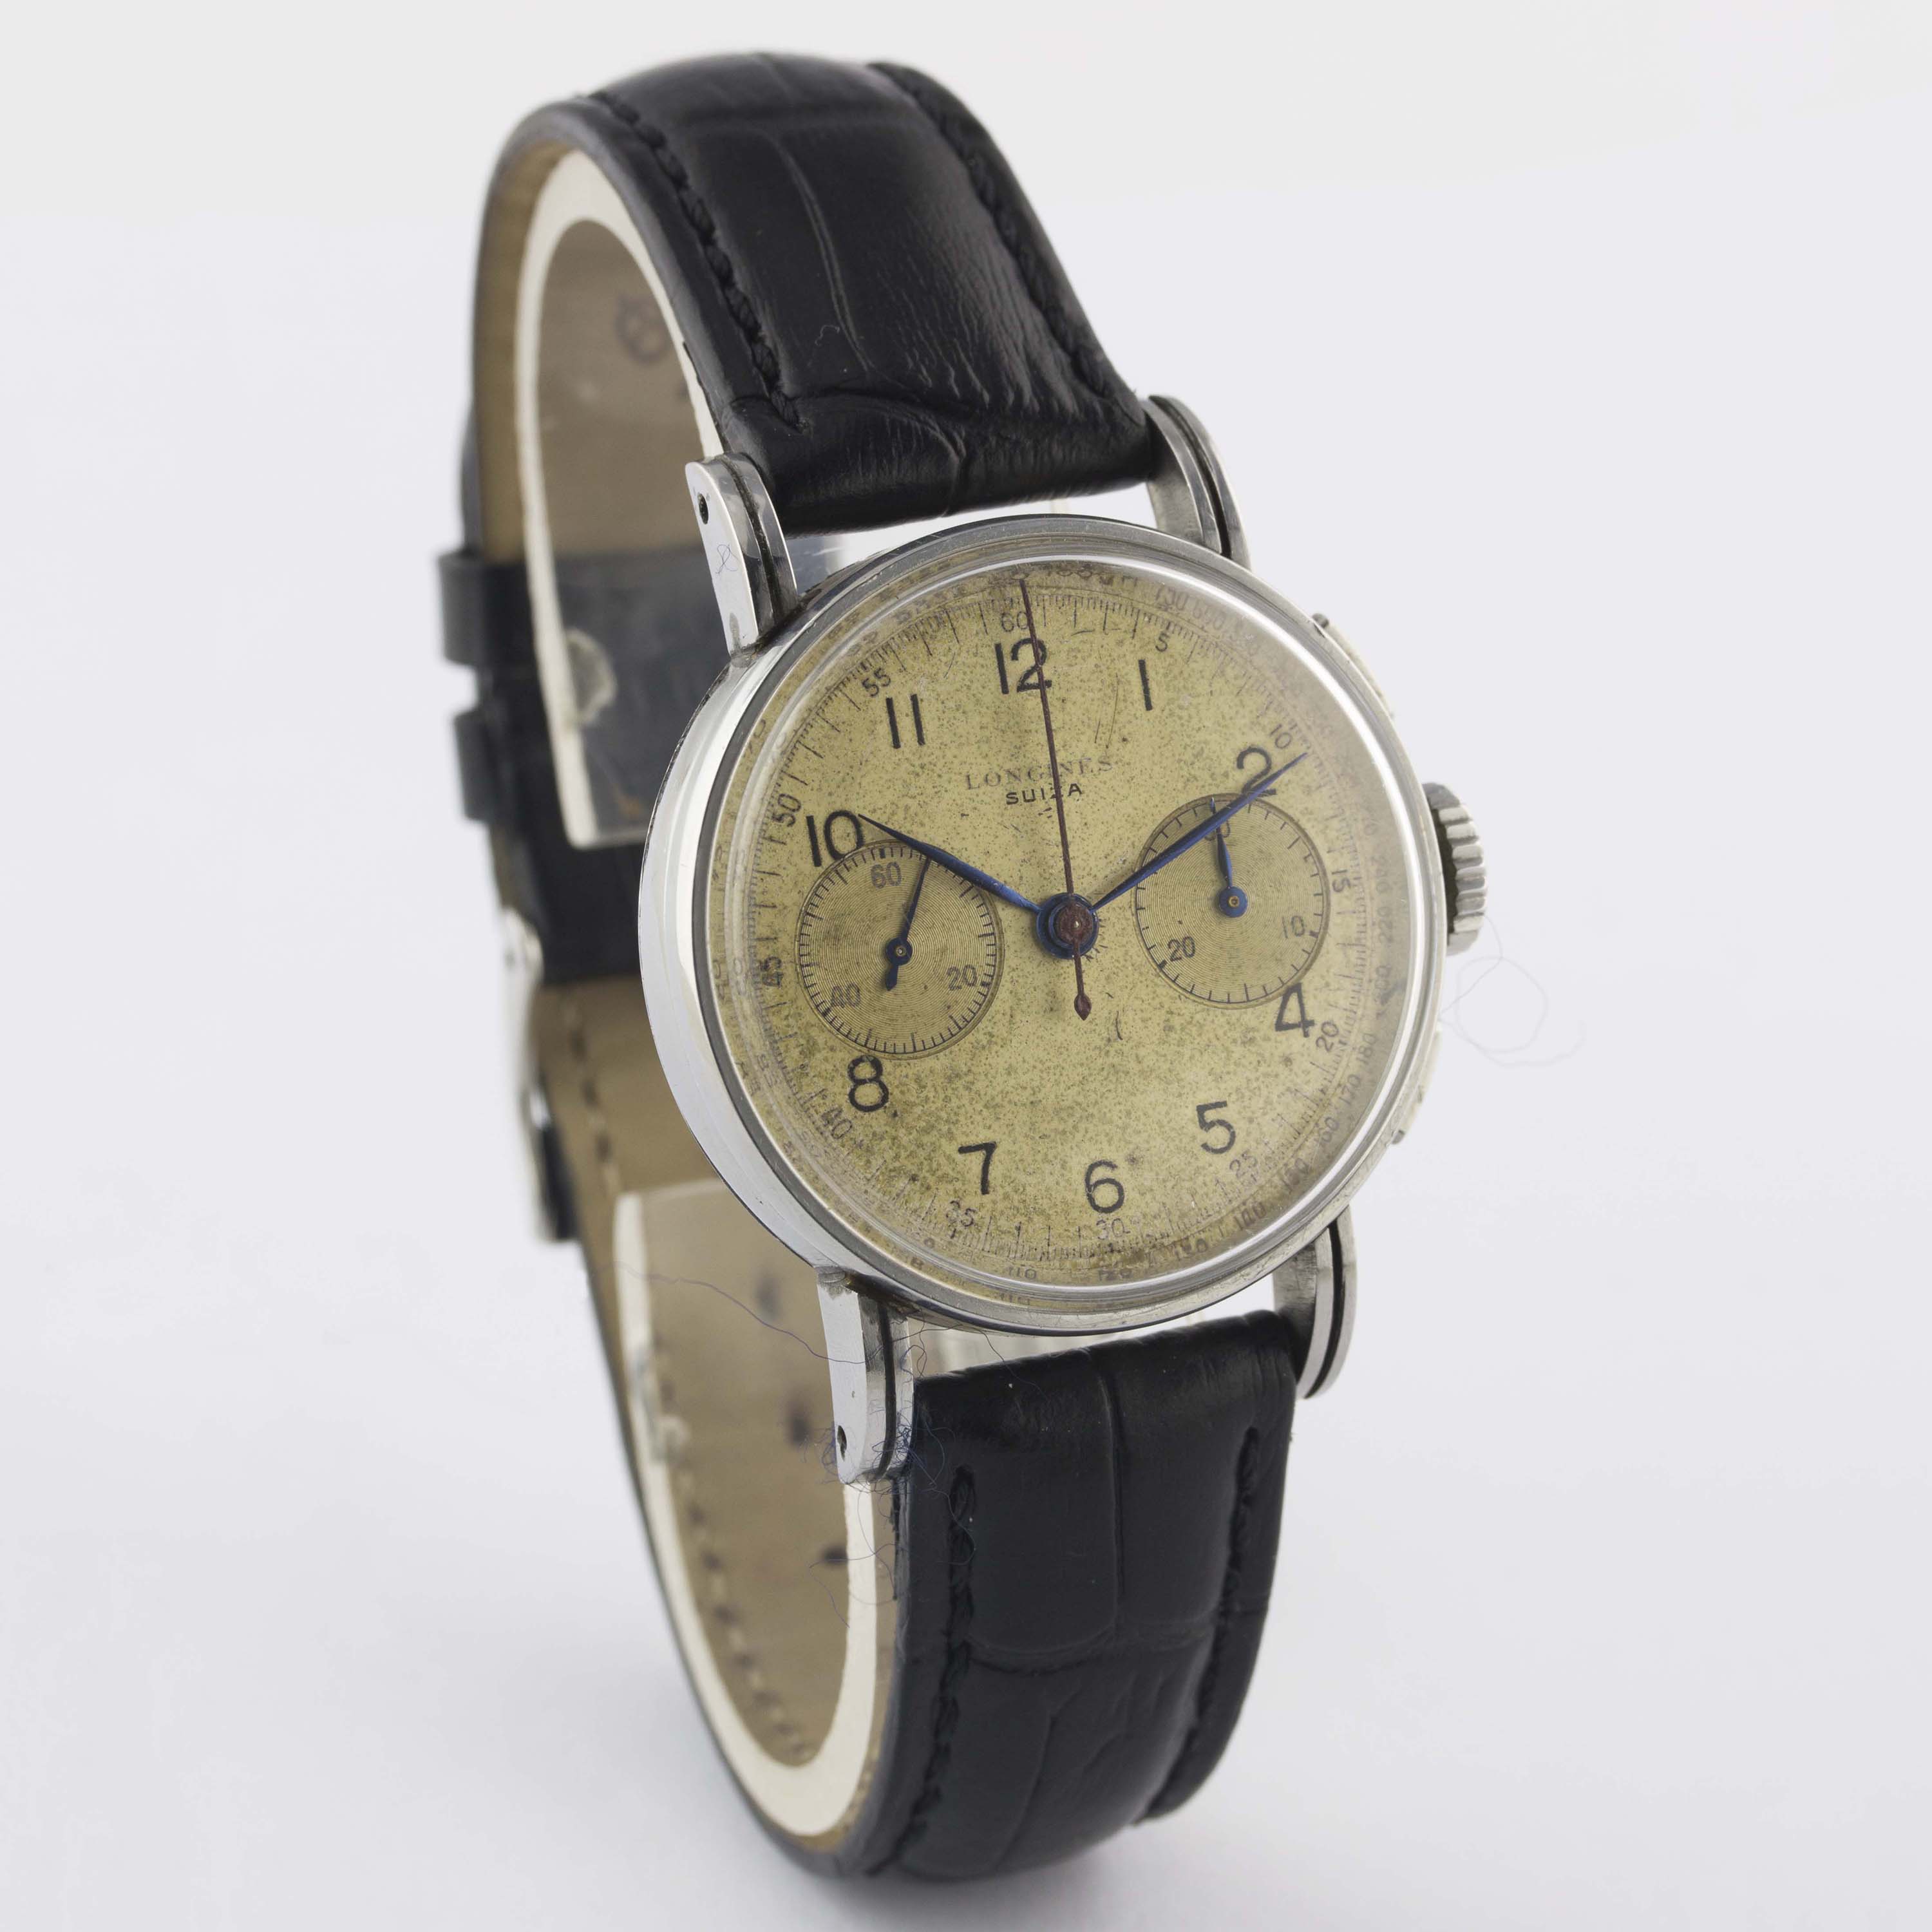 A GENTLEMAN'S STAINLESS STEEL LONGINES FLYBACK CHRONOGRAPH WRIST WATCH CIRCA 1946, REF. 3226 - Image 5 of 10